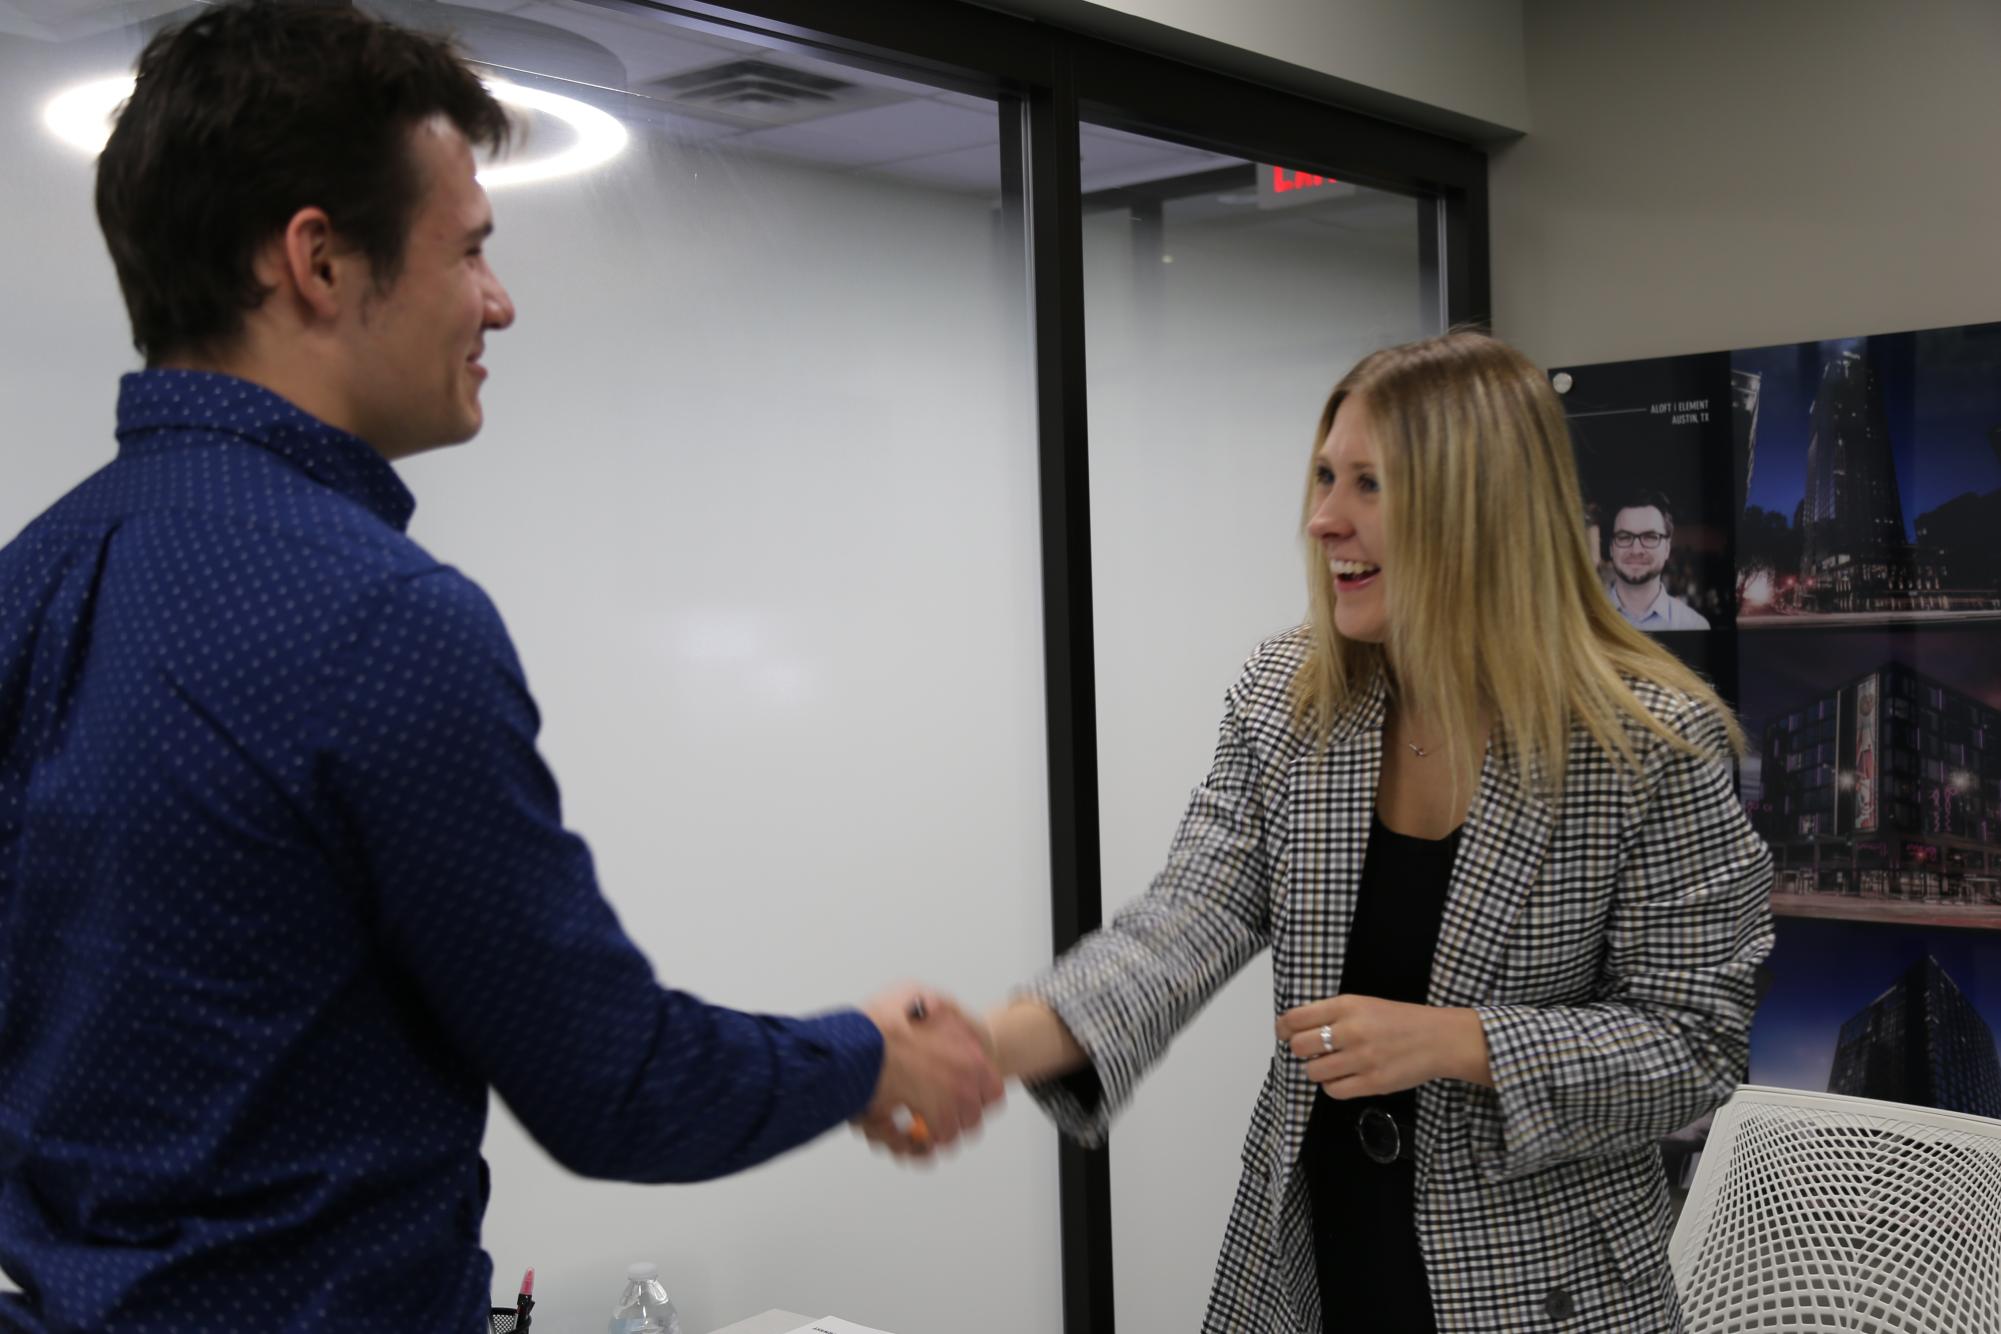 Nathan Tiltges and Kiersten Gora prepare for a round of sales simulation as a part of MKG 43300 Professional Selling. The class teaches students how to sell, a skill normally learned on the job.